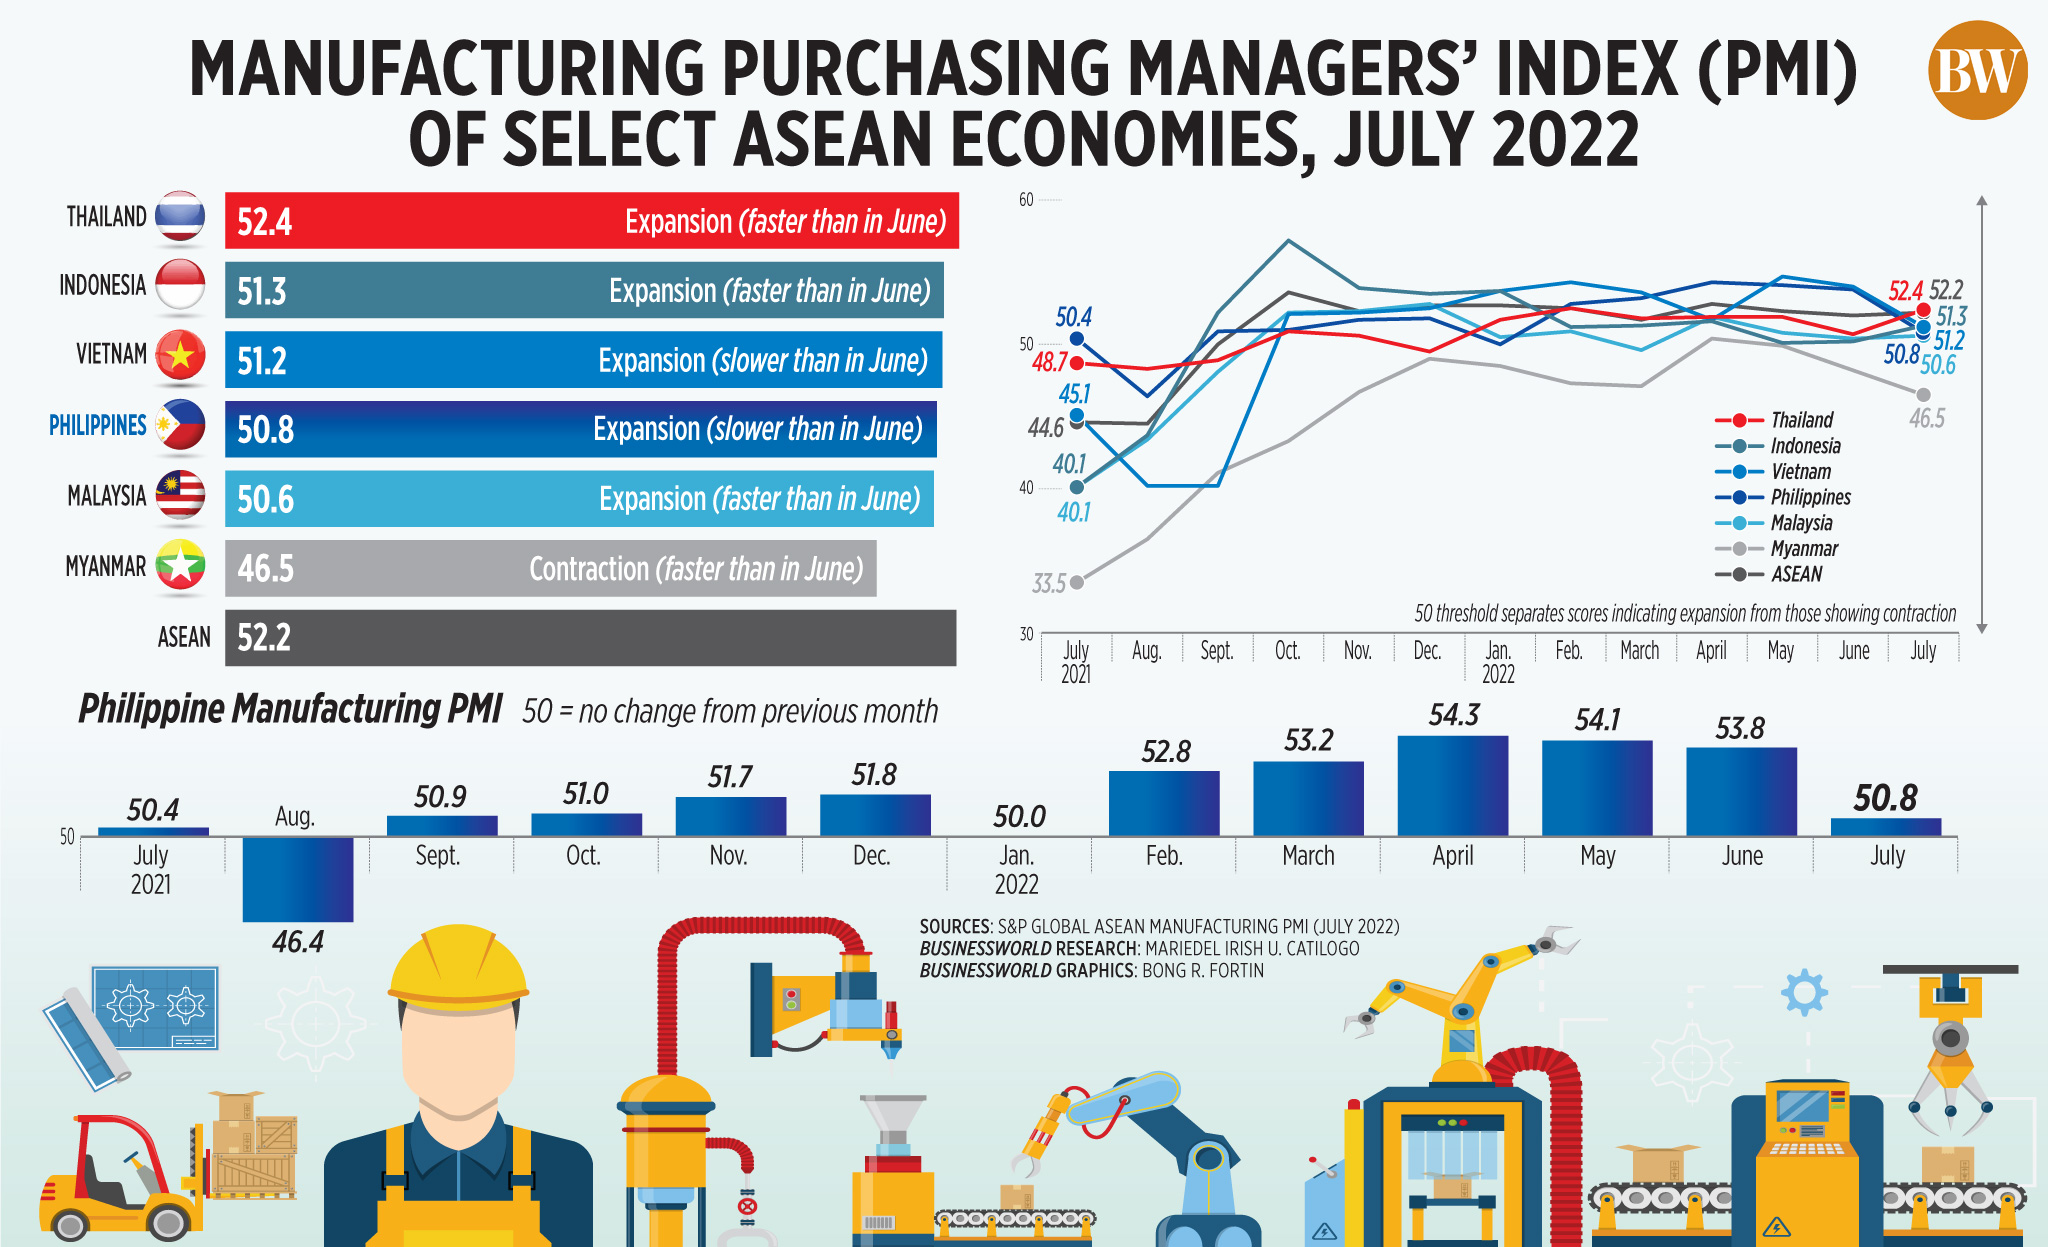 Manufacturing Purchasing Managers’ Index (PMI) of select ASEAN economies, July 2022